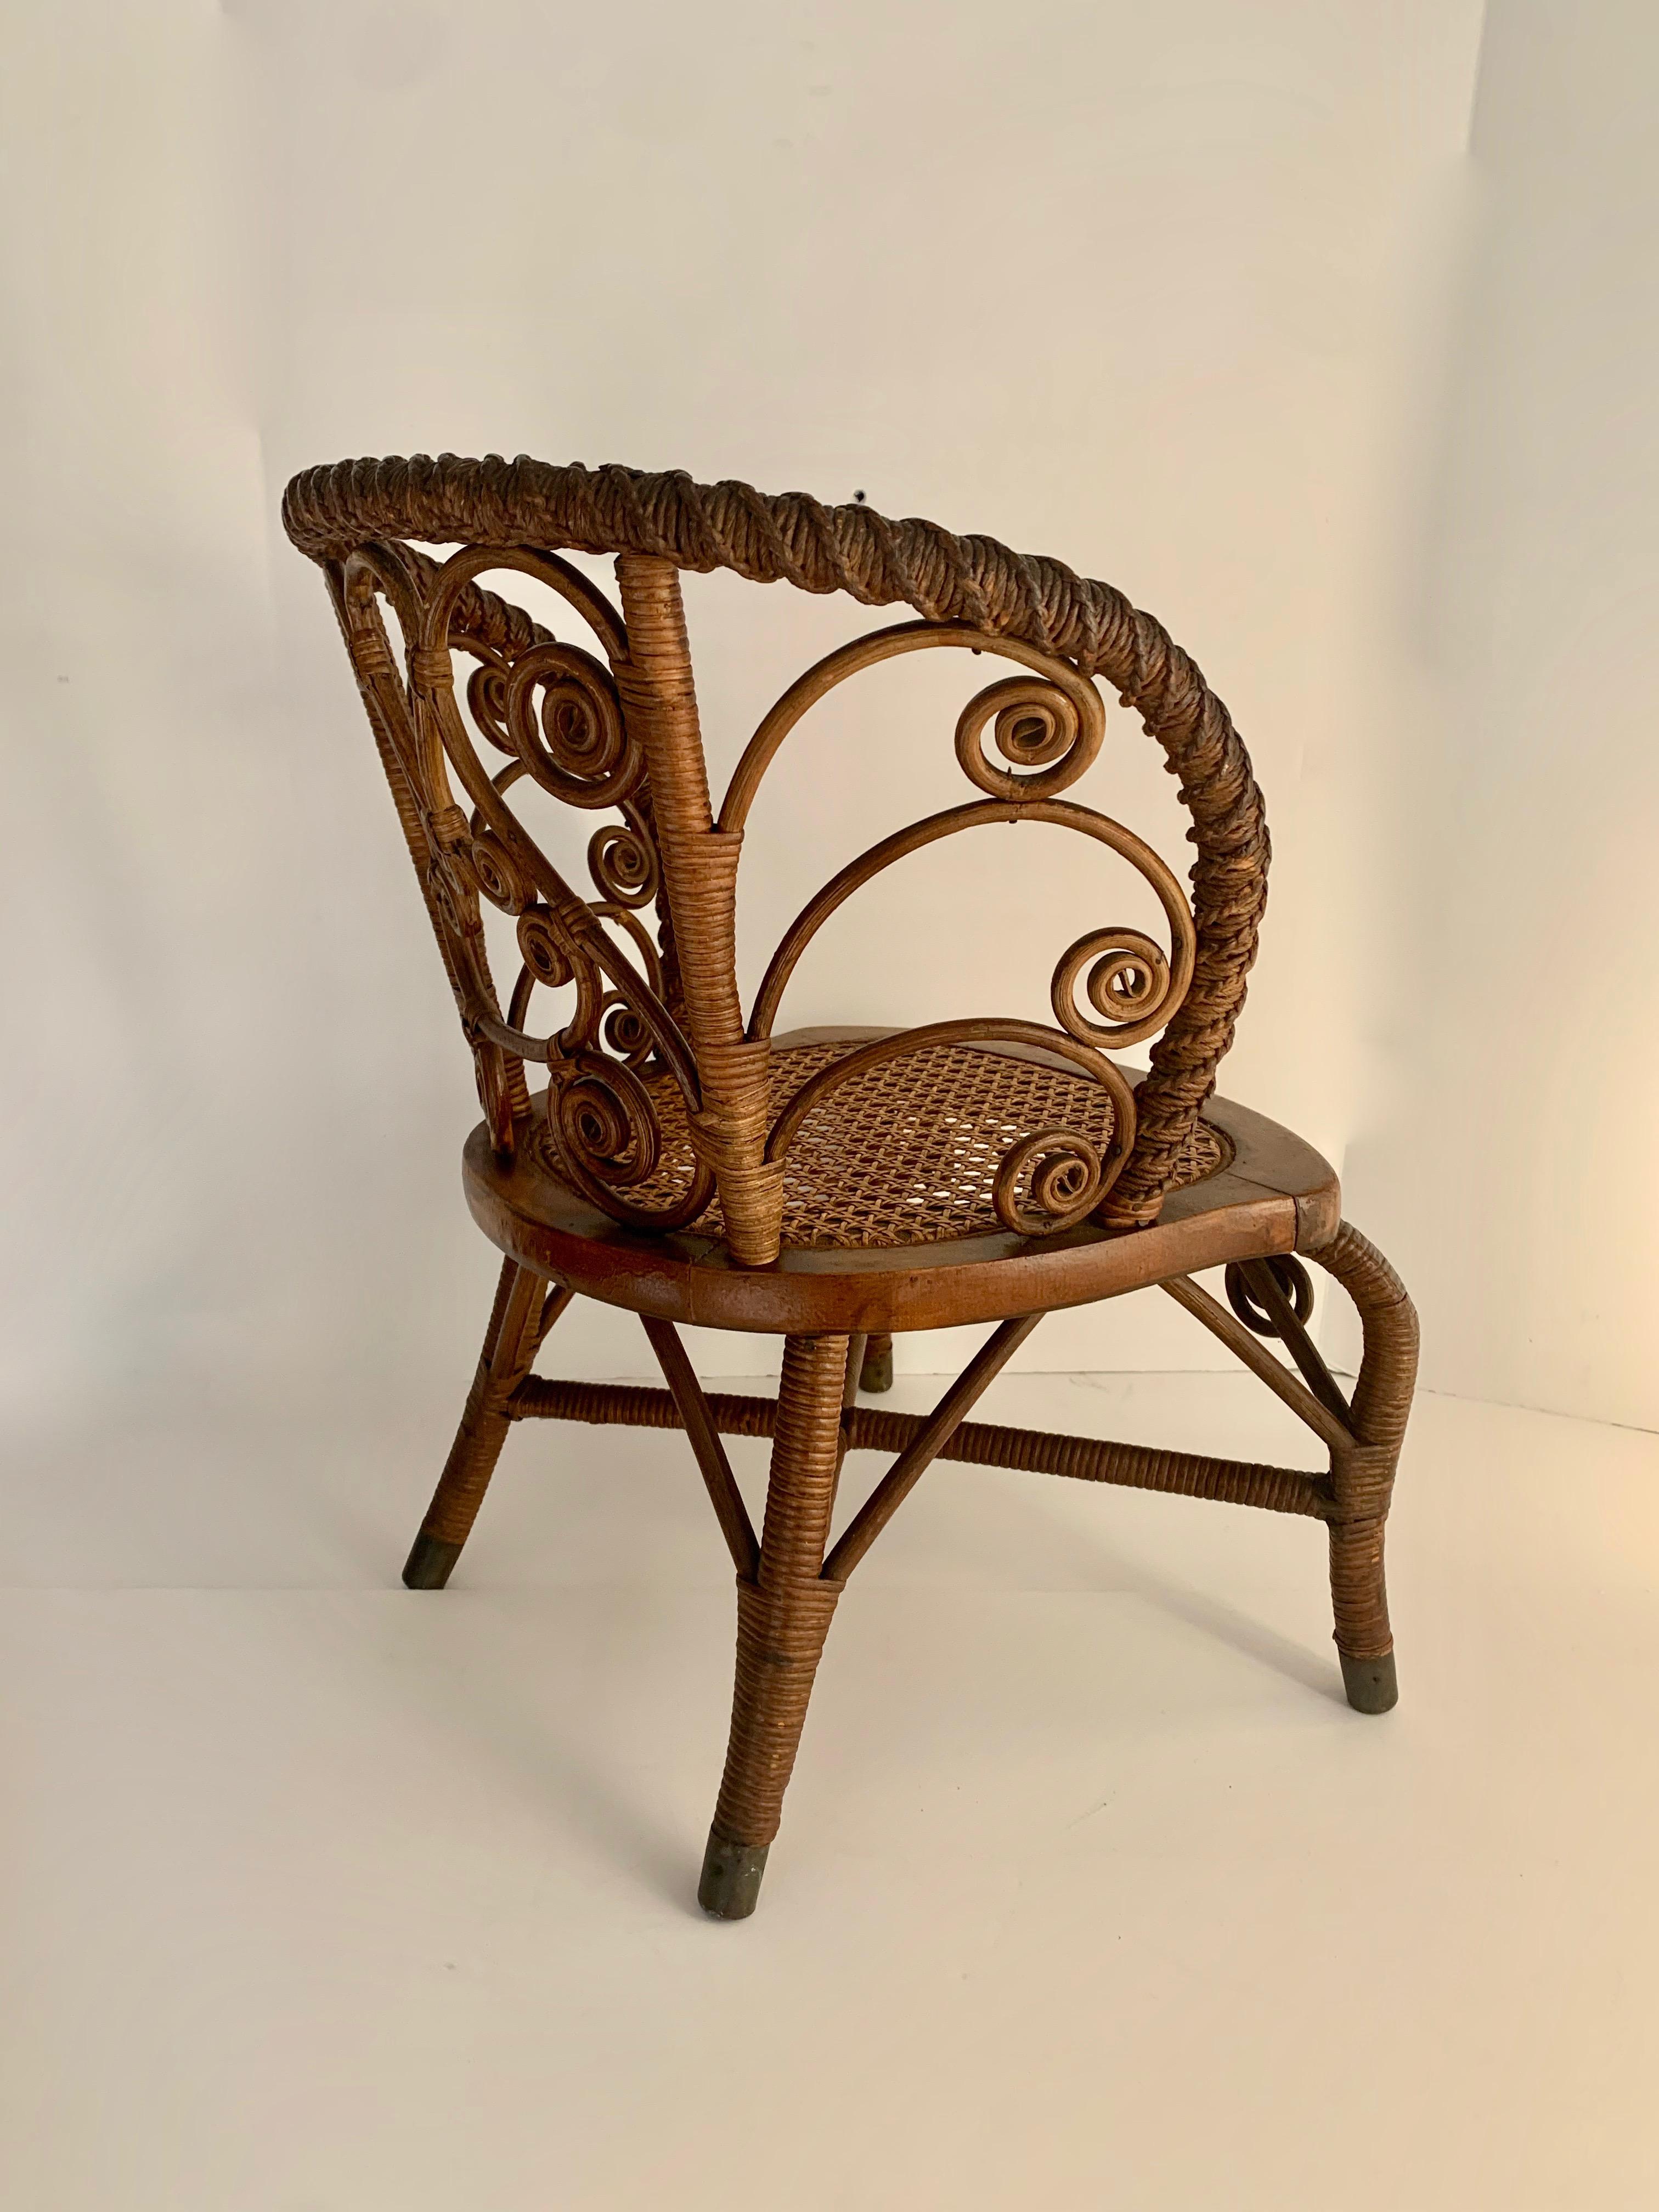 North American Pair of Childs Wicker Chair and Rocker